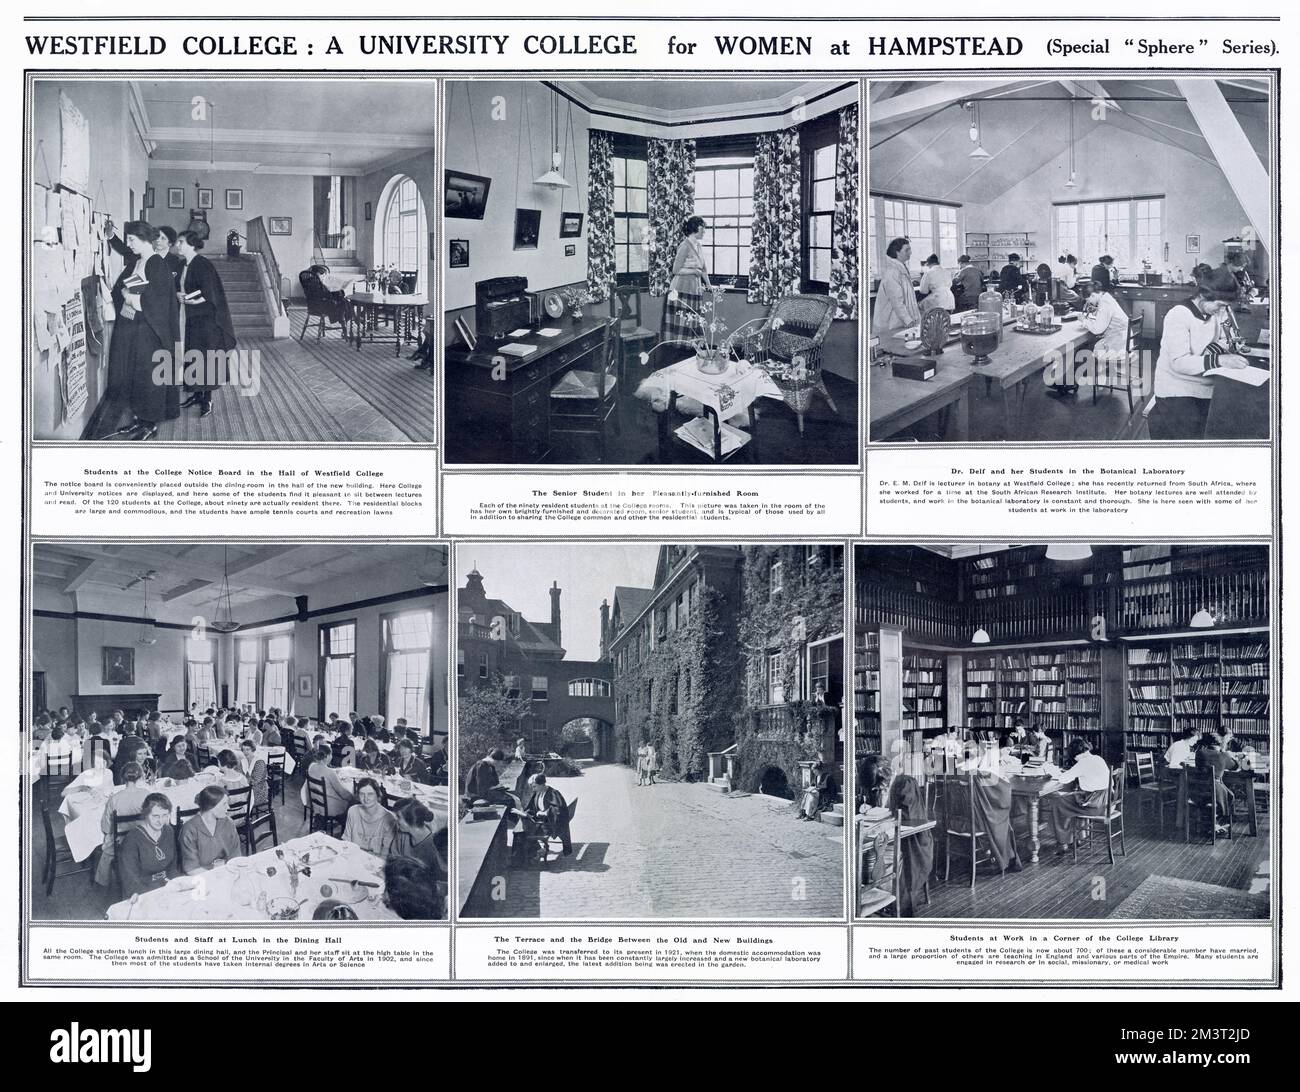 Westfield College, Hampstead - A University College for Women. Stock Photo